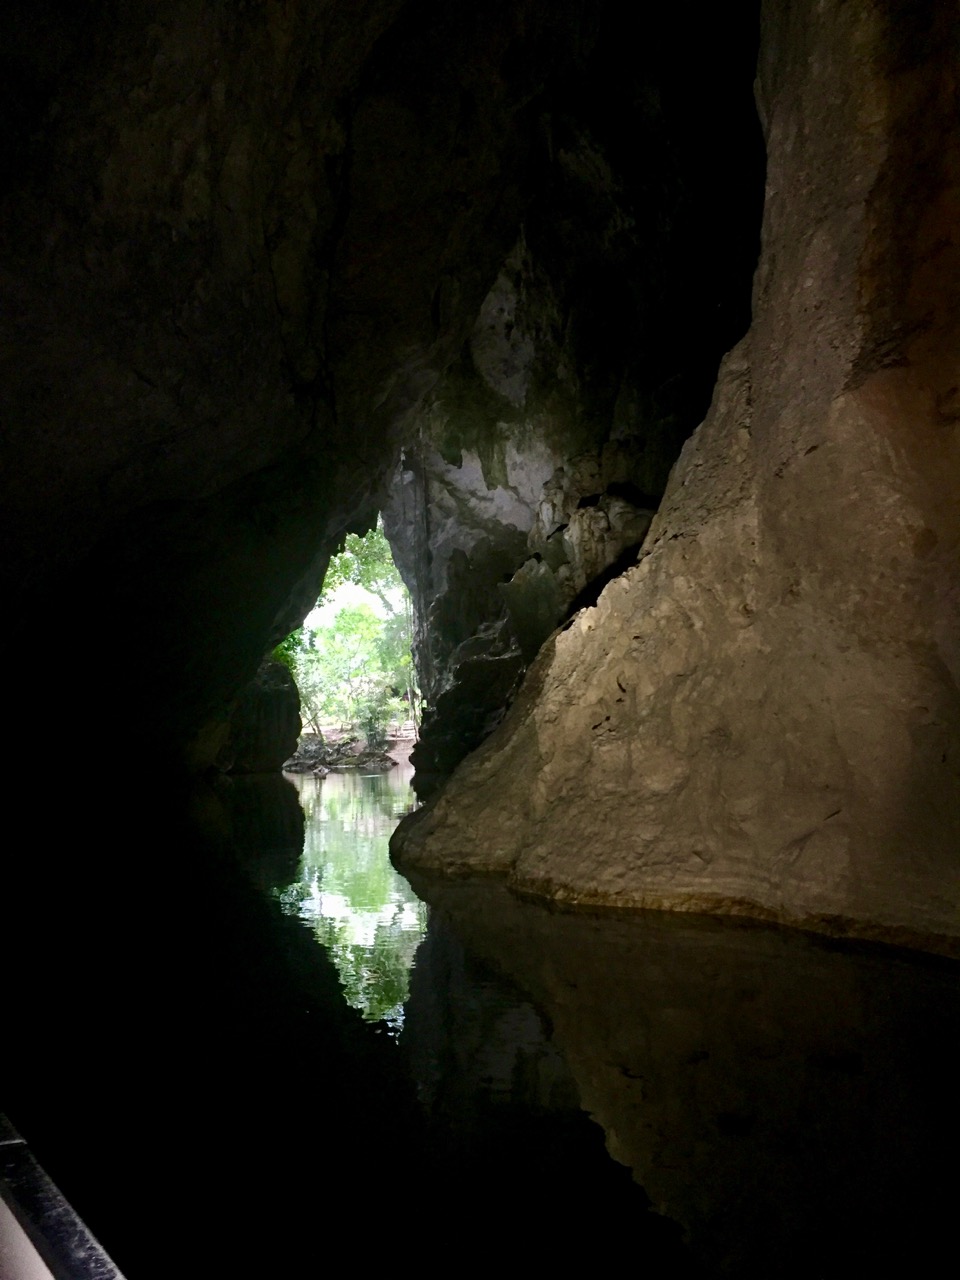 A river floating out of a cave.